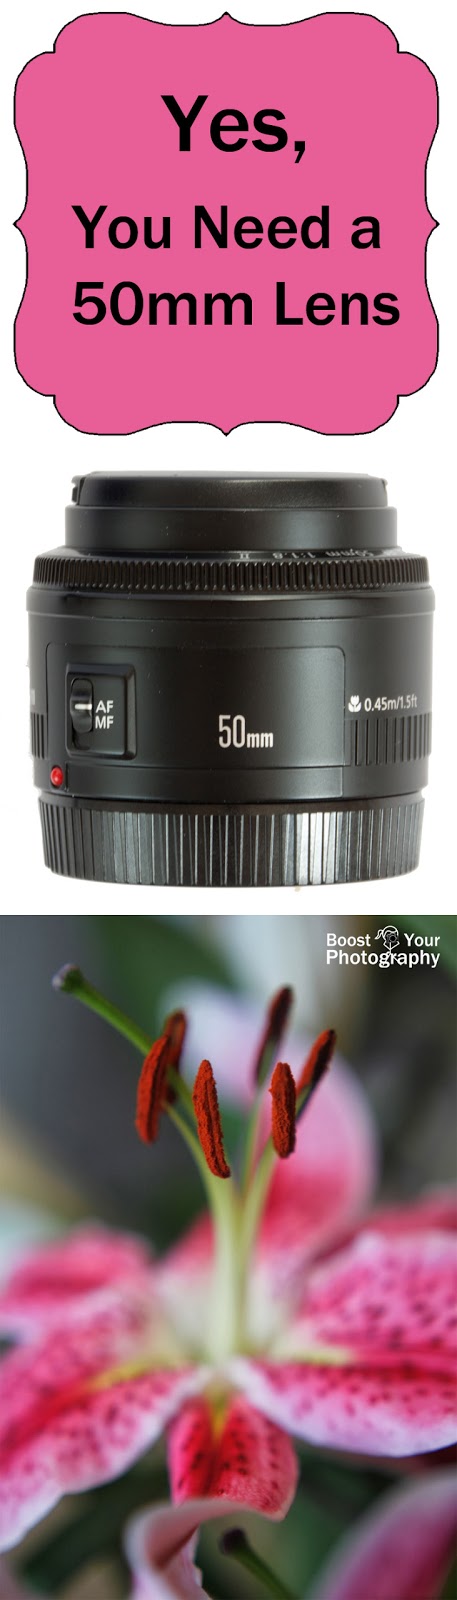 Yes, You Need a 50mm Lens | Boost Your Photography